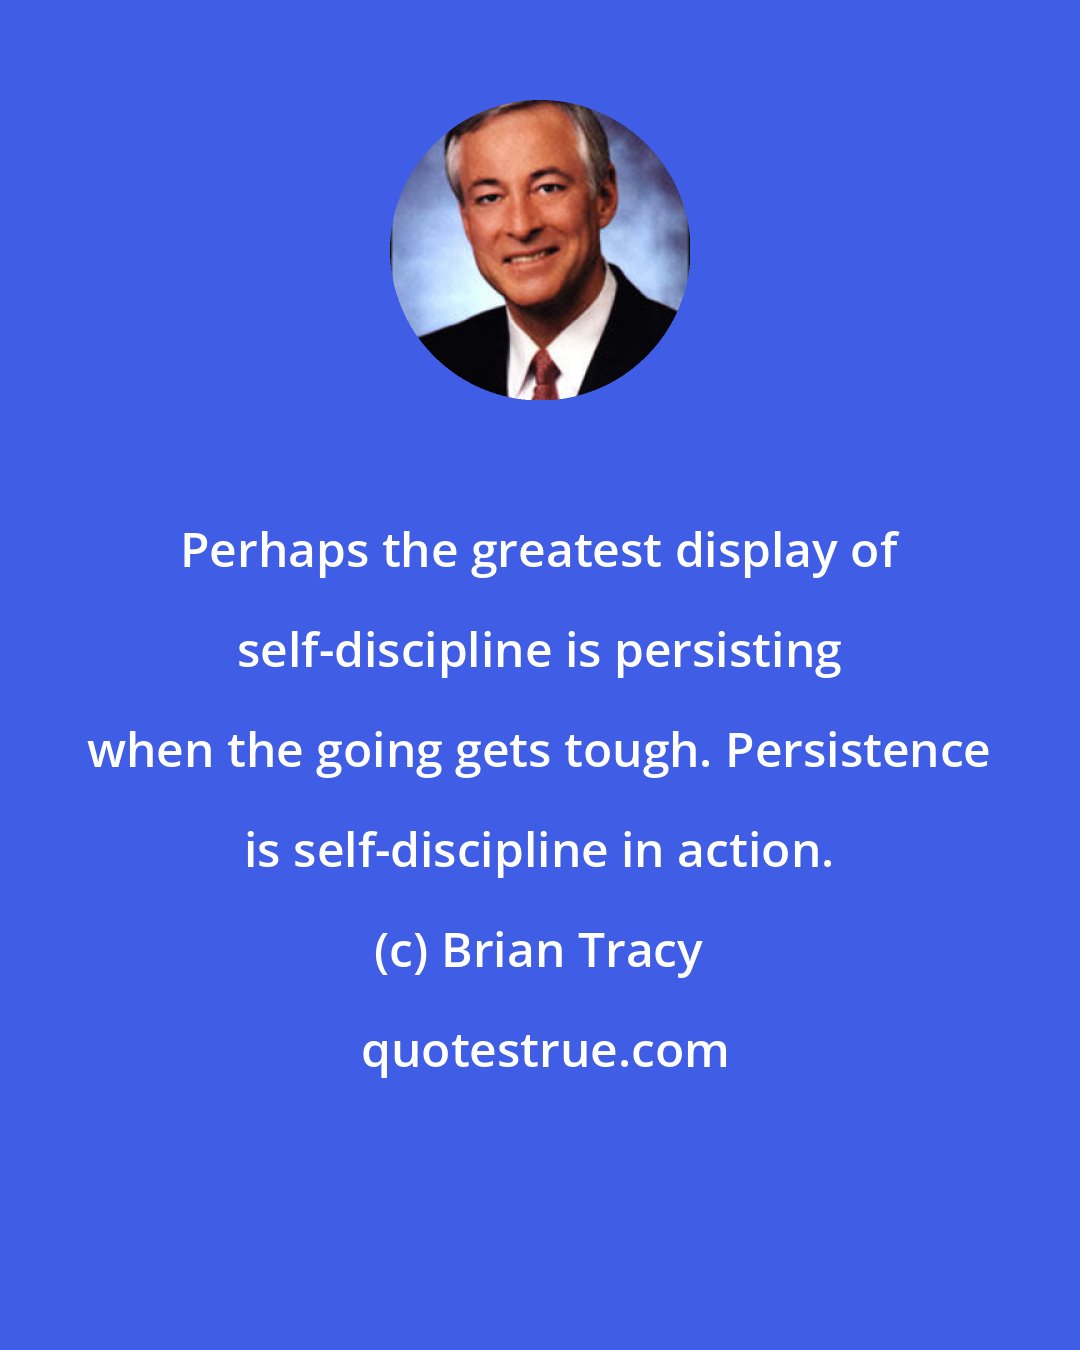 Brian Tracy: Perhaps the greatest display of self-discipline is persisting when the going gets tough. Persistence is self-discipline in action.